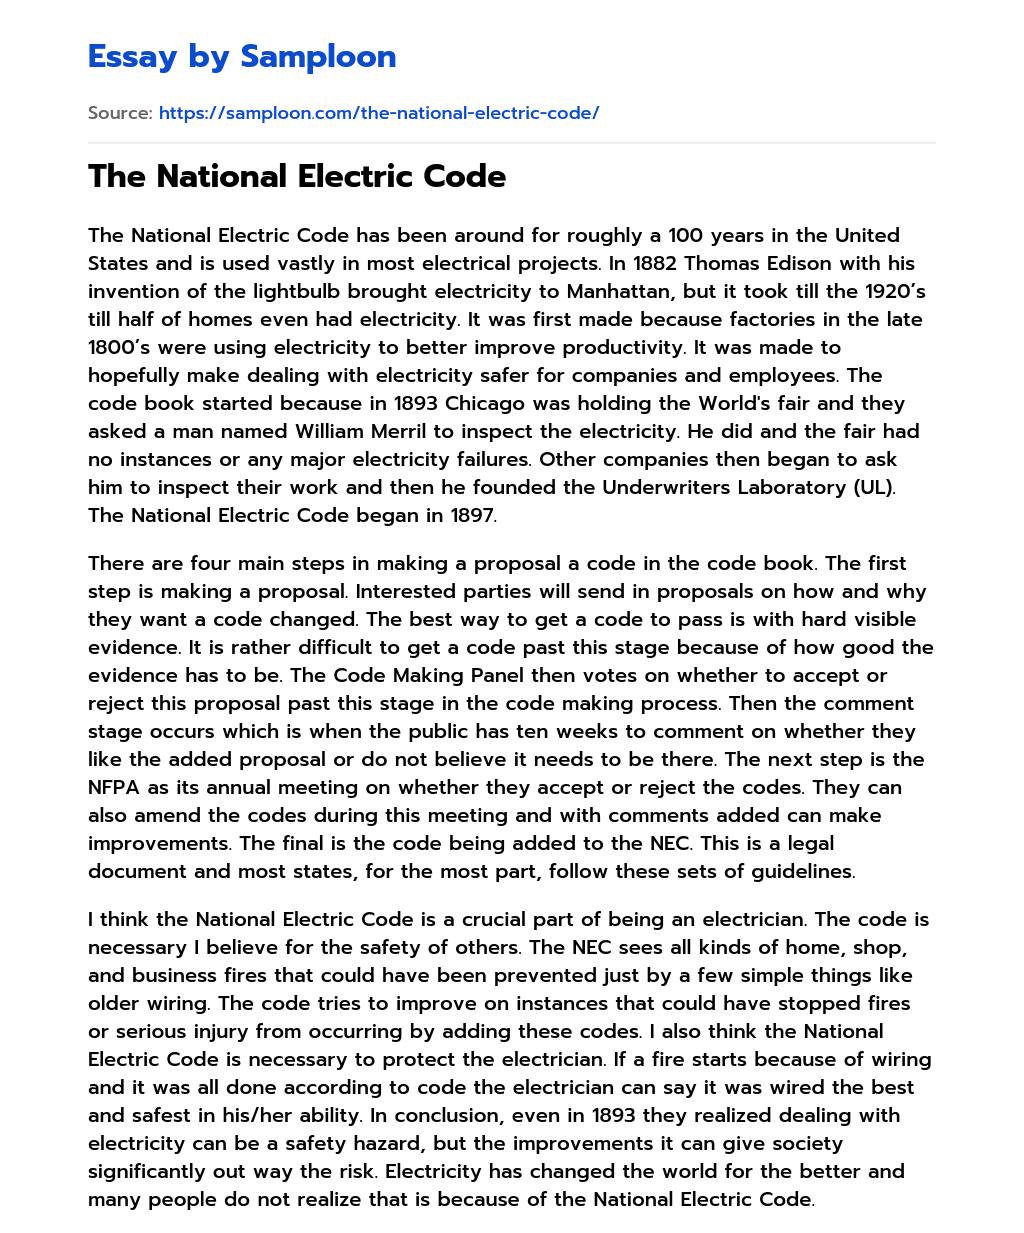 The National Electric Code essay